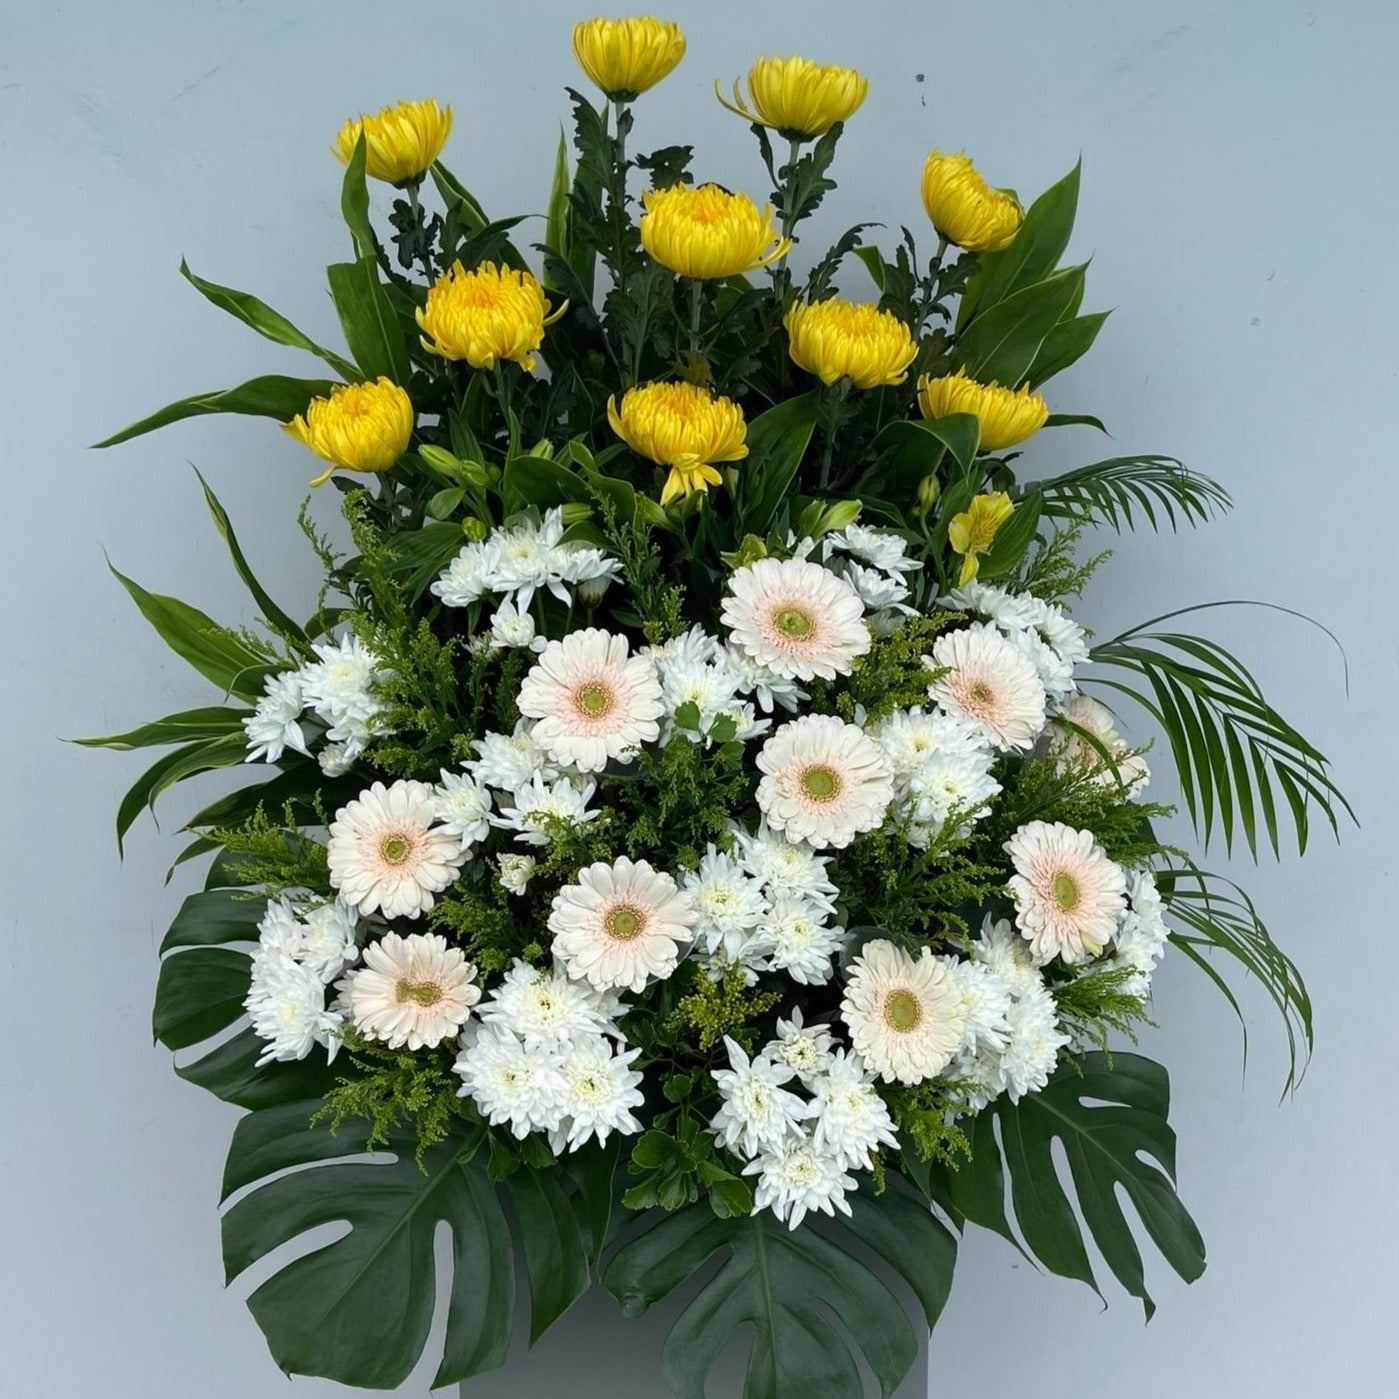 Cheap Fresh Mums and Gerbera Daisies Flower Condolences Floral Stand under $150 in Singapore Free Delivery